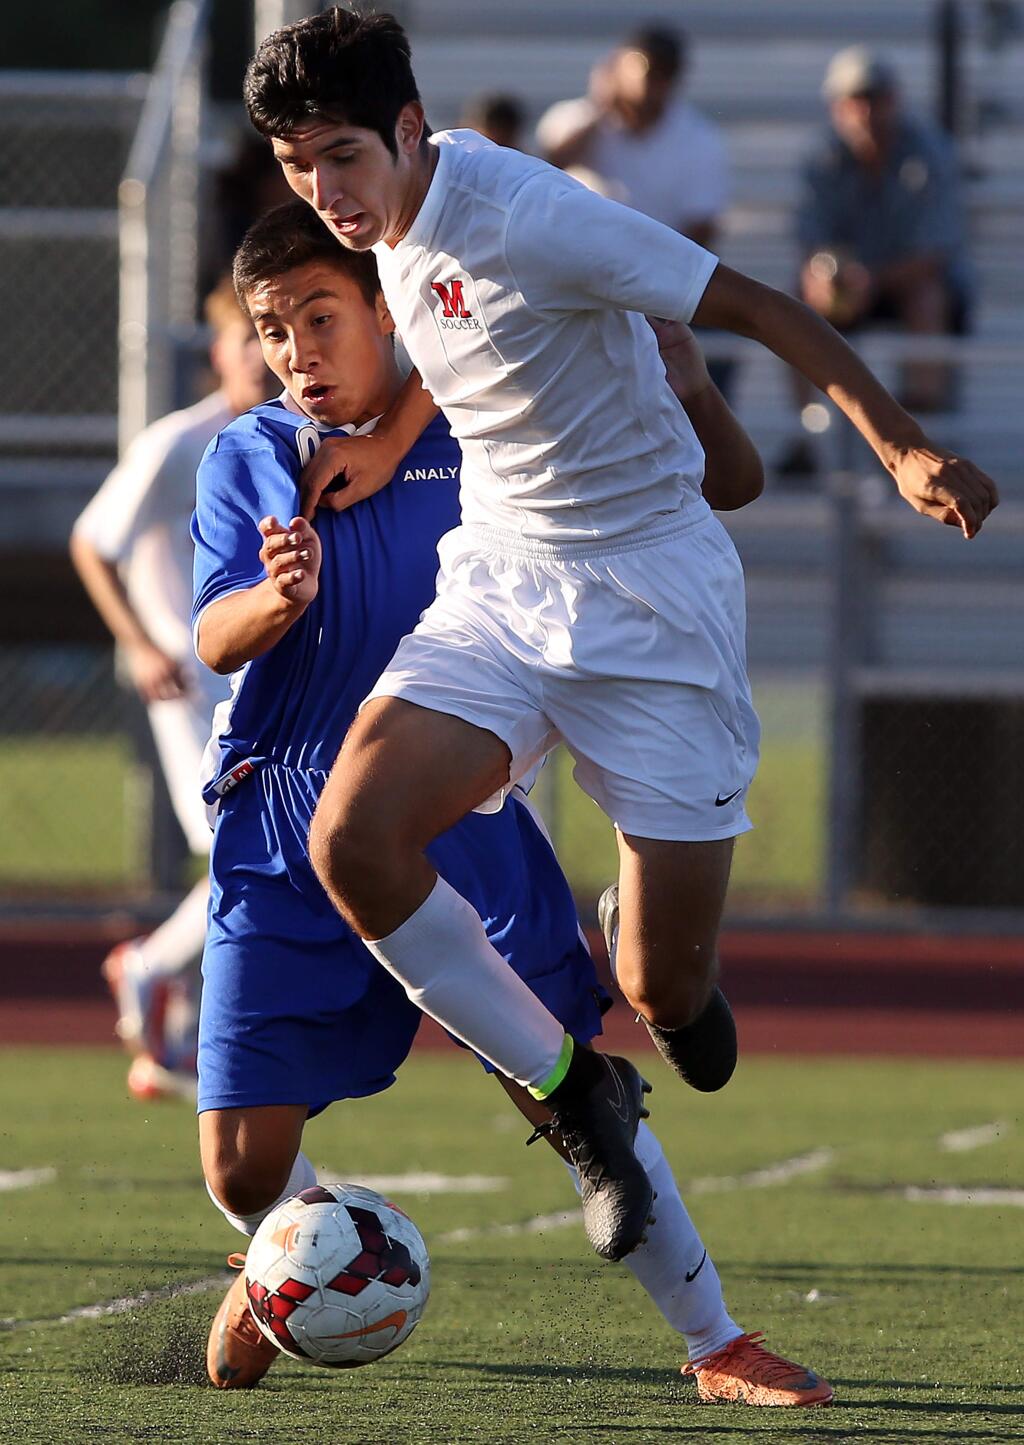 Montgomery's Evan Martinez, right, and Analy's Abel Hernandez, left, fight for the ball during the game held at Montgomery High School, Tuesday, September 9, 2014.(Crista Jeremiason / The Press Democrat)